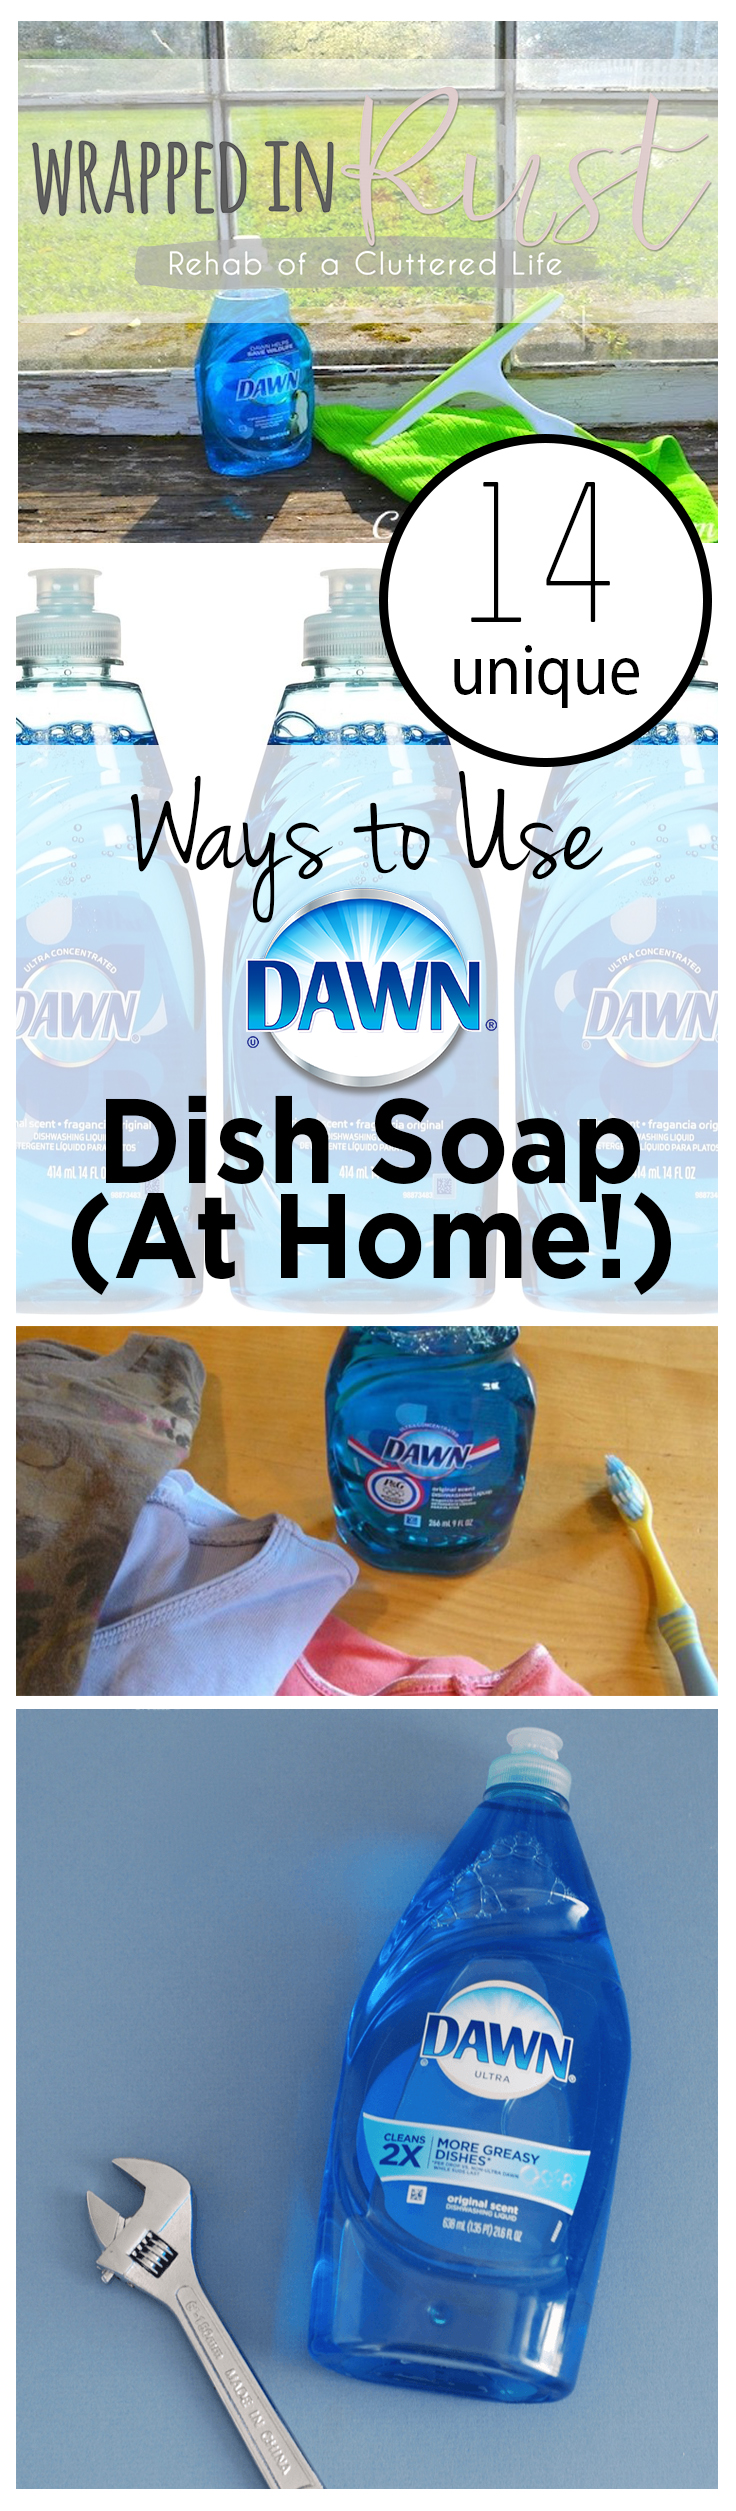 How to Use Dawn Dish Soap, Things to Do With Dawn Dish Soap, Dawn Dish Soap Hacks, Uses for Dawn Dish Soap, Popular Pin, Dawn Dish Soap Around The House, Life Hacks, Easy Life Hacks, Simple Life Hacks.